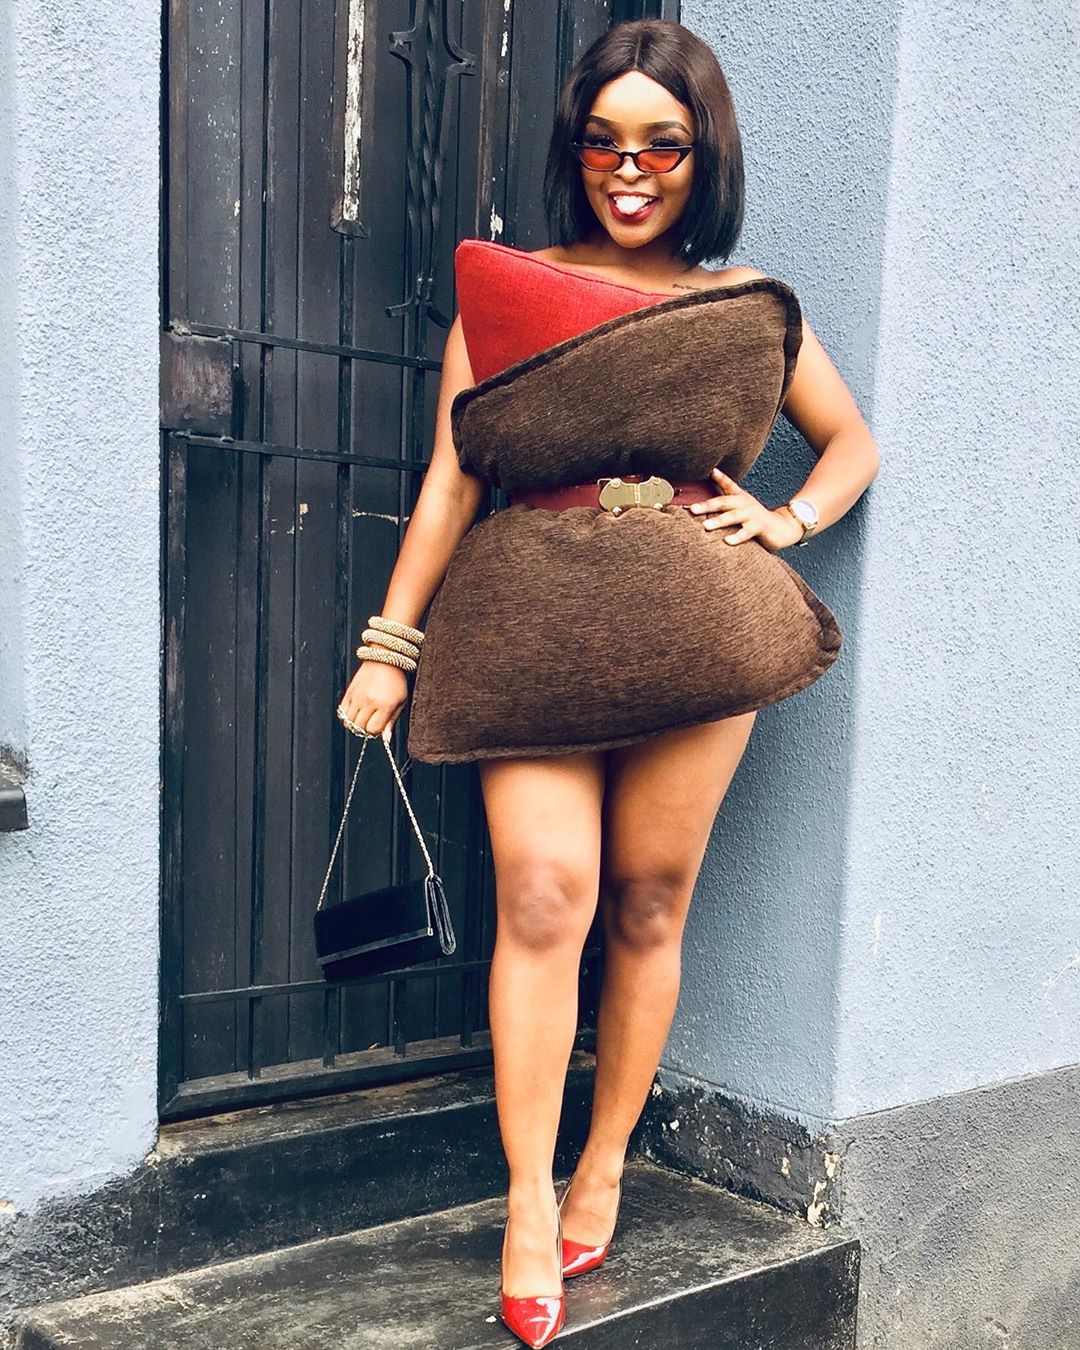 Black Women Are Owning The Pillow Challenge